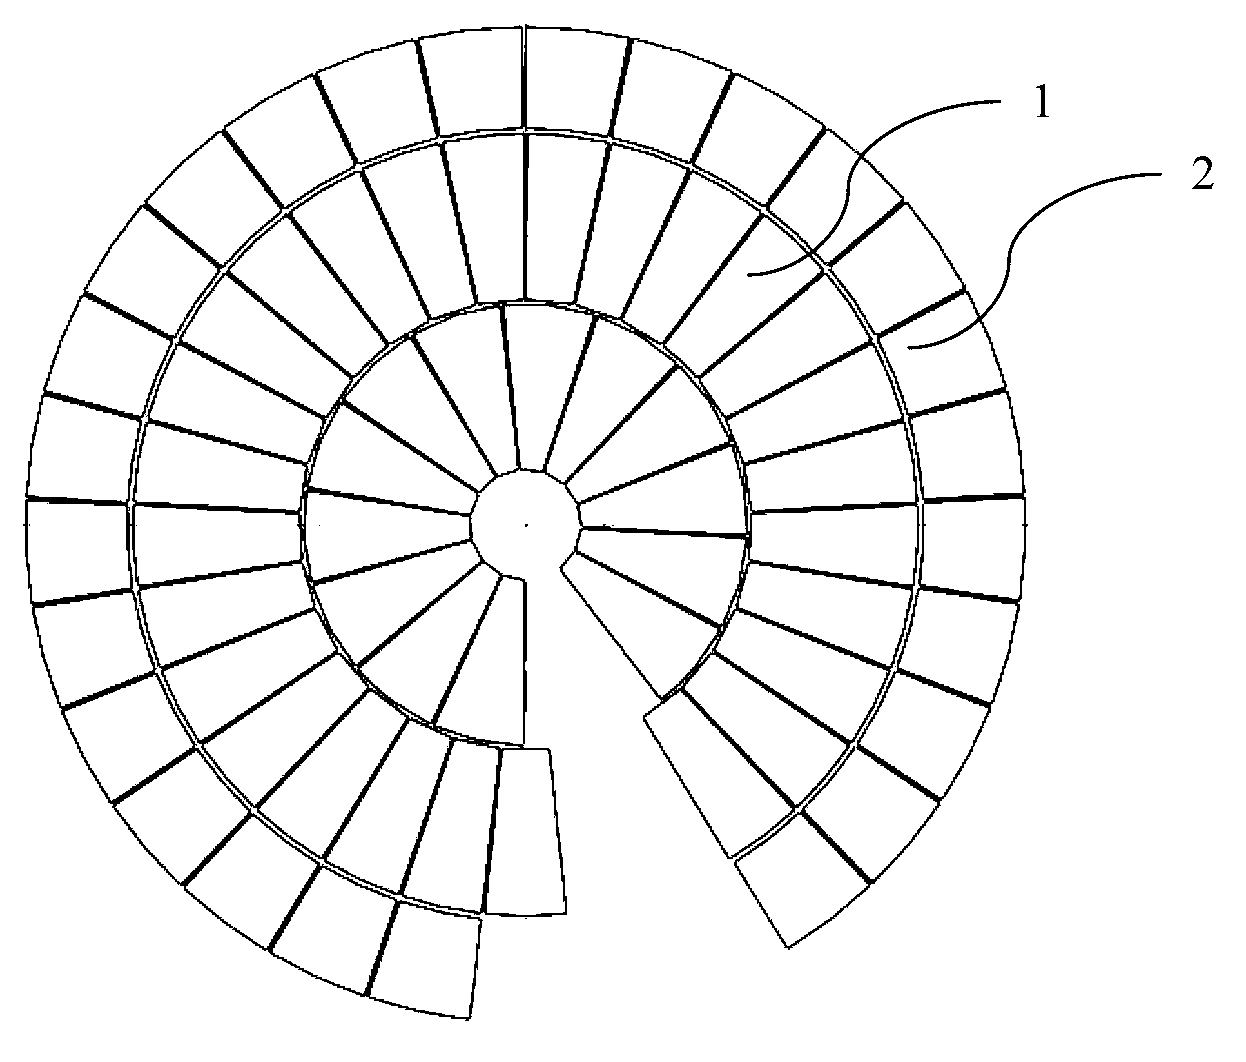 Solar concentration disc system with constant focusing capacity